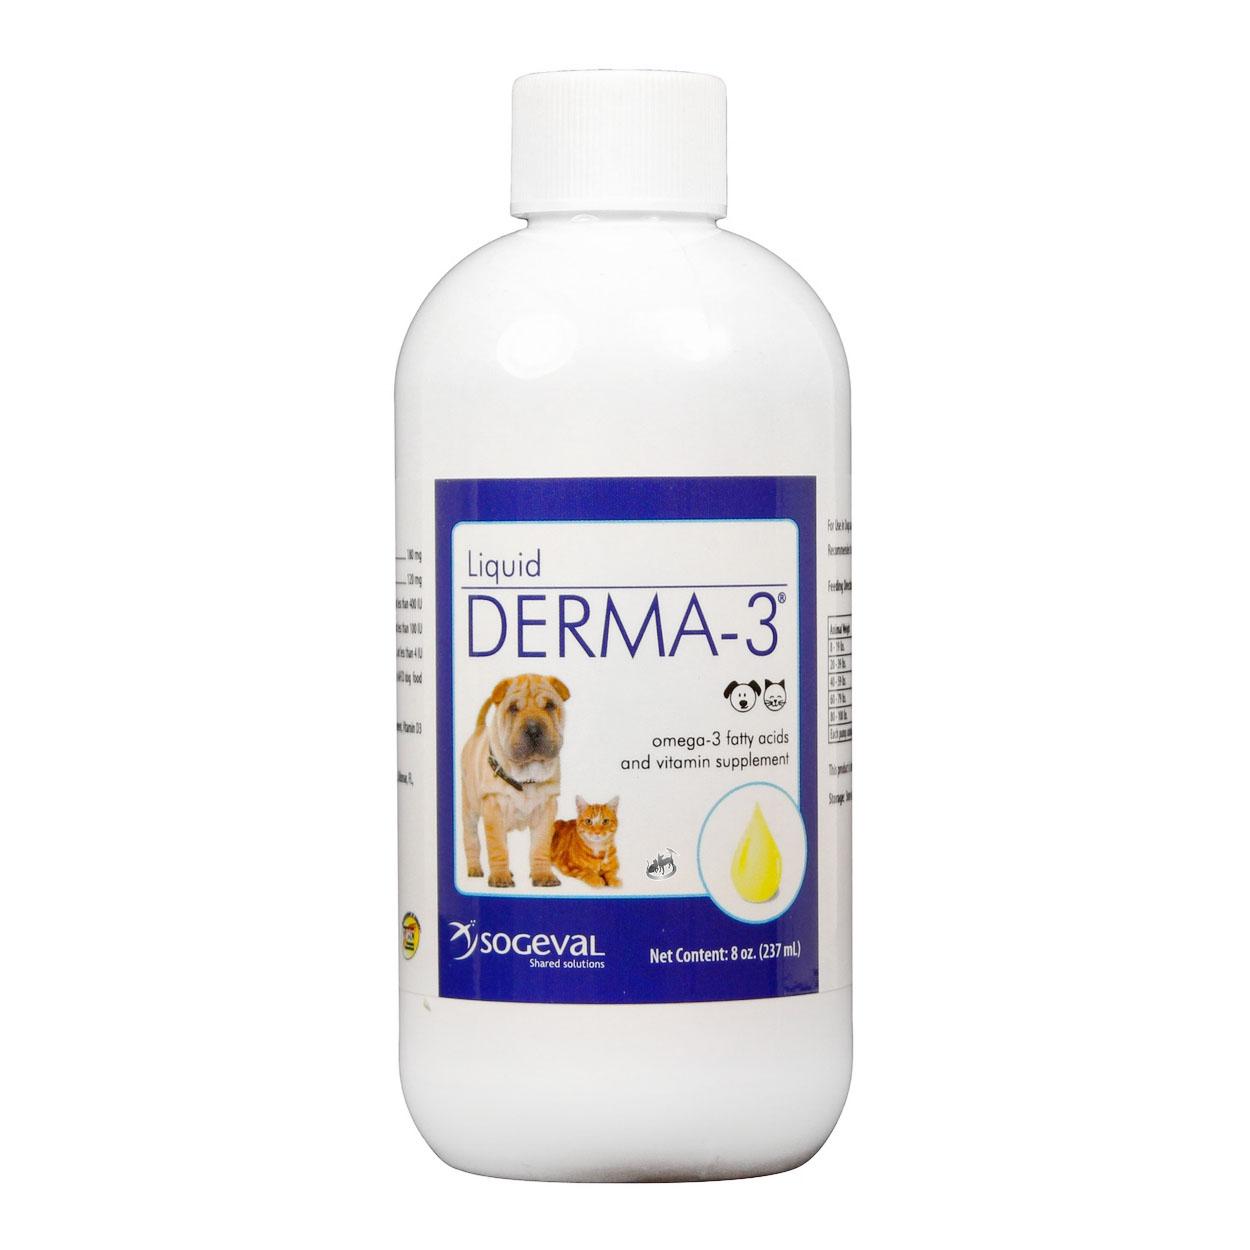 Sogeval Derma-3 Liquid Fatty Acid Supplement For Dogs and Cats